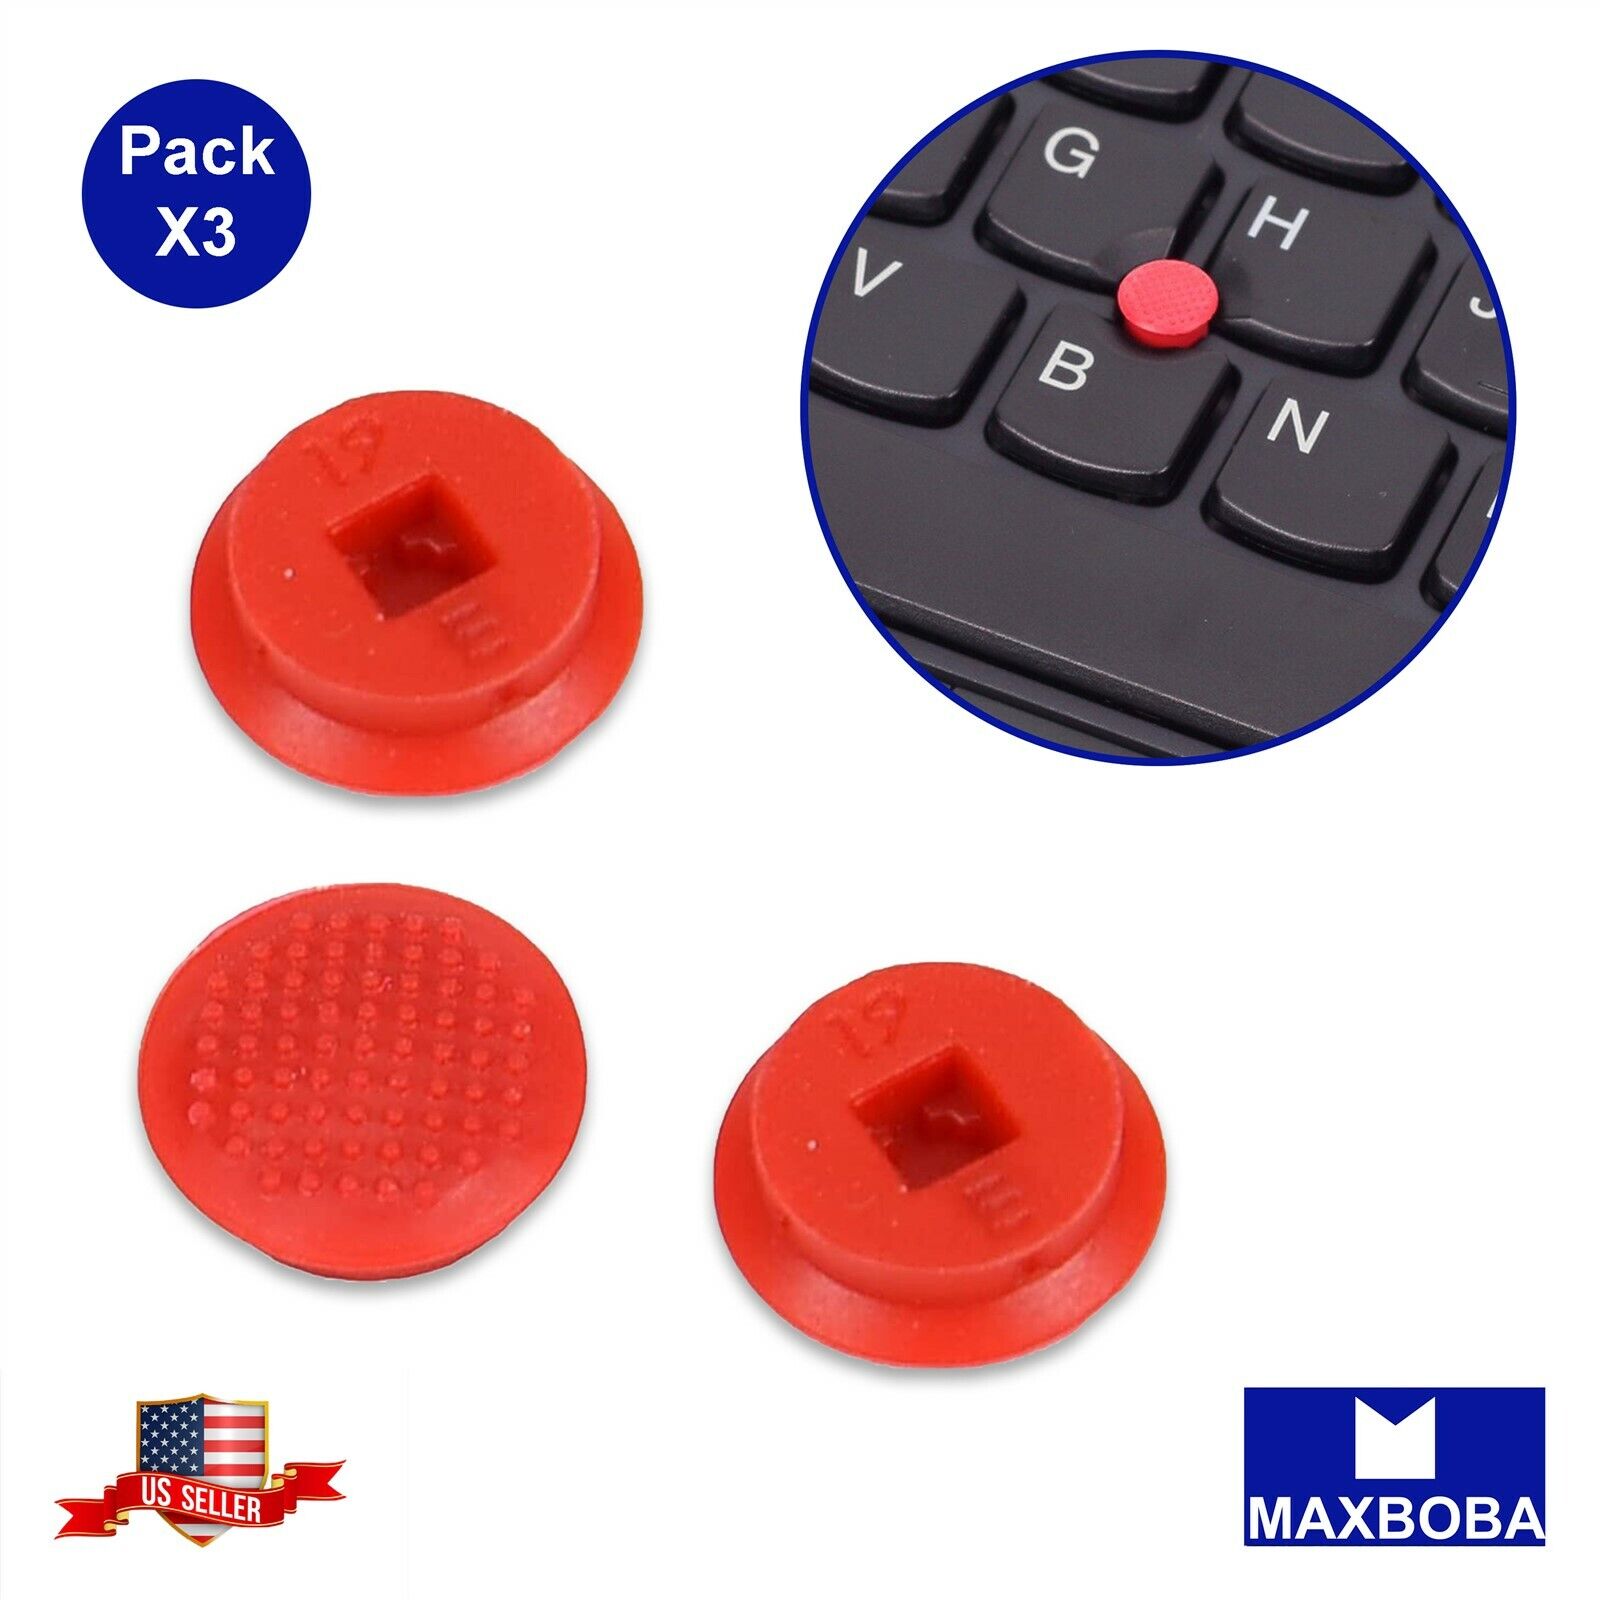 3 Pack Rubber Mouse Pointer Trackpoint Red Cap For Lenovo Thinkpad Laptop 2*2mm Generic TrackPoint